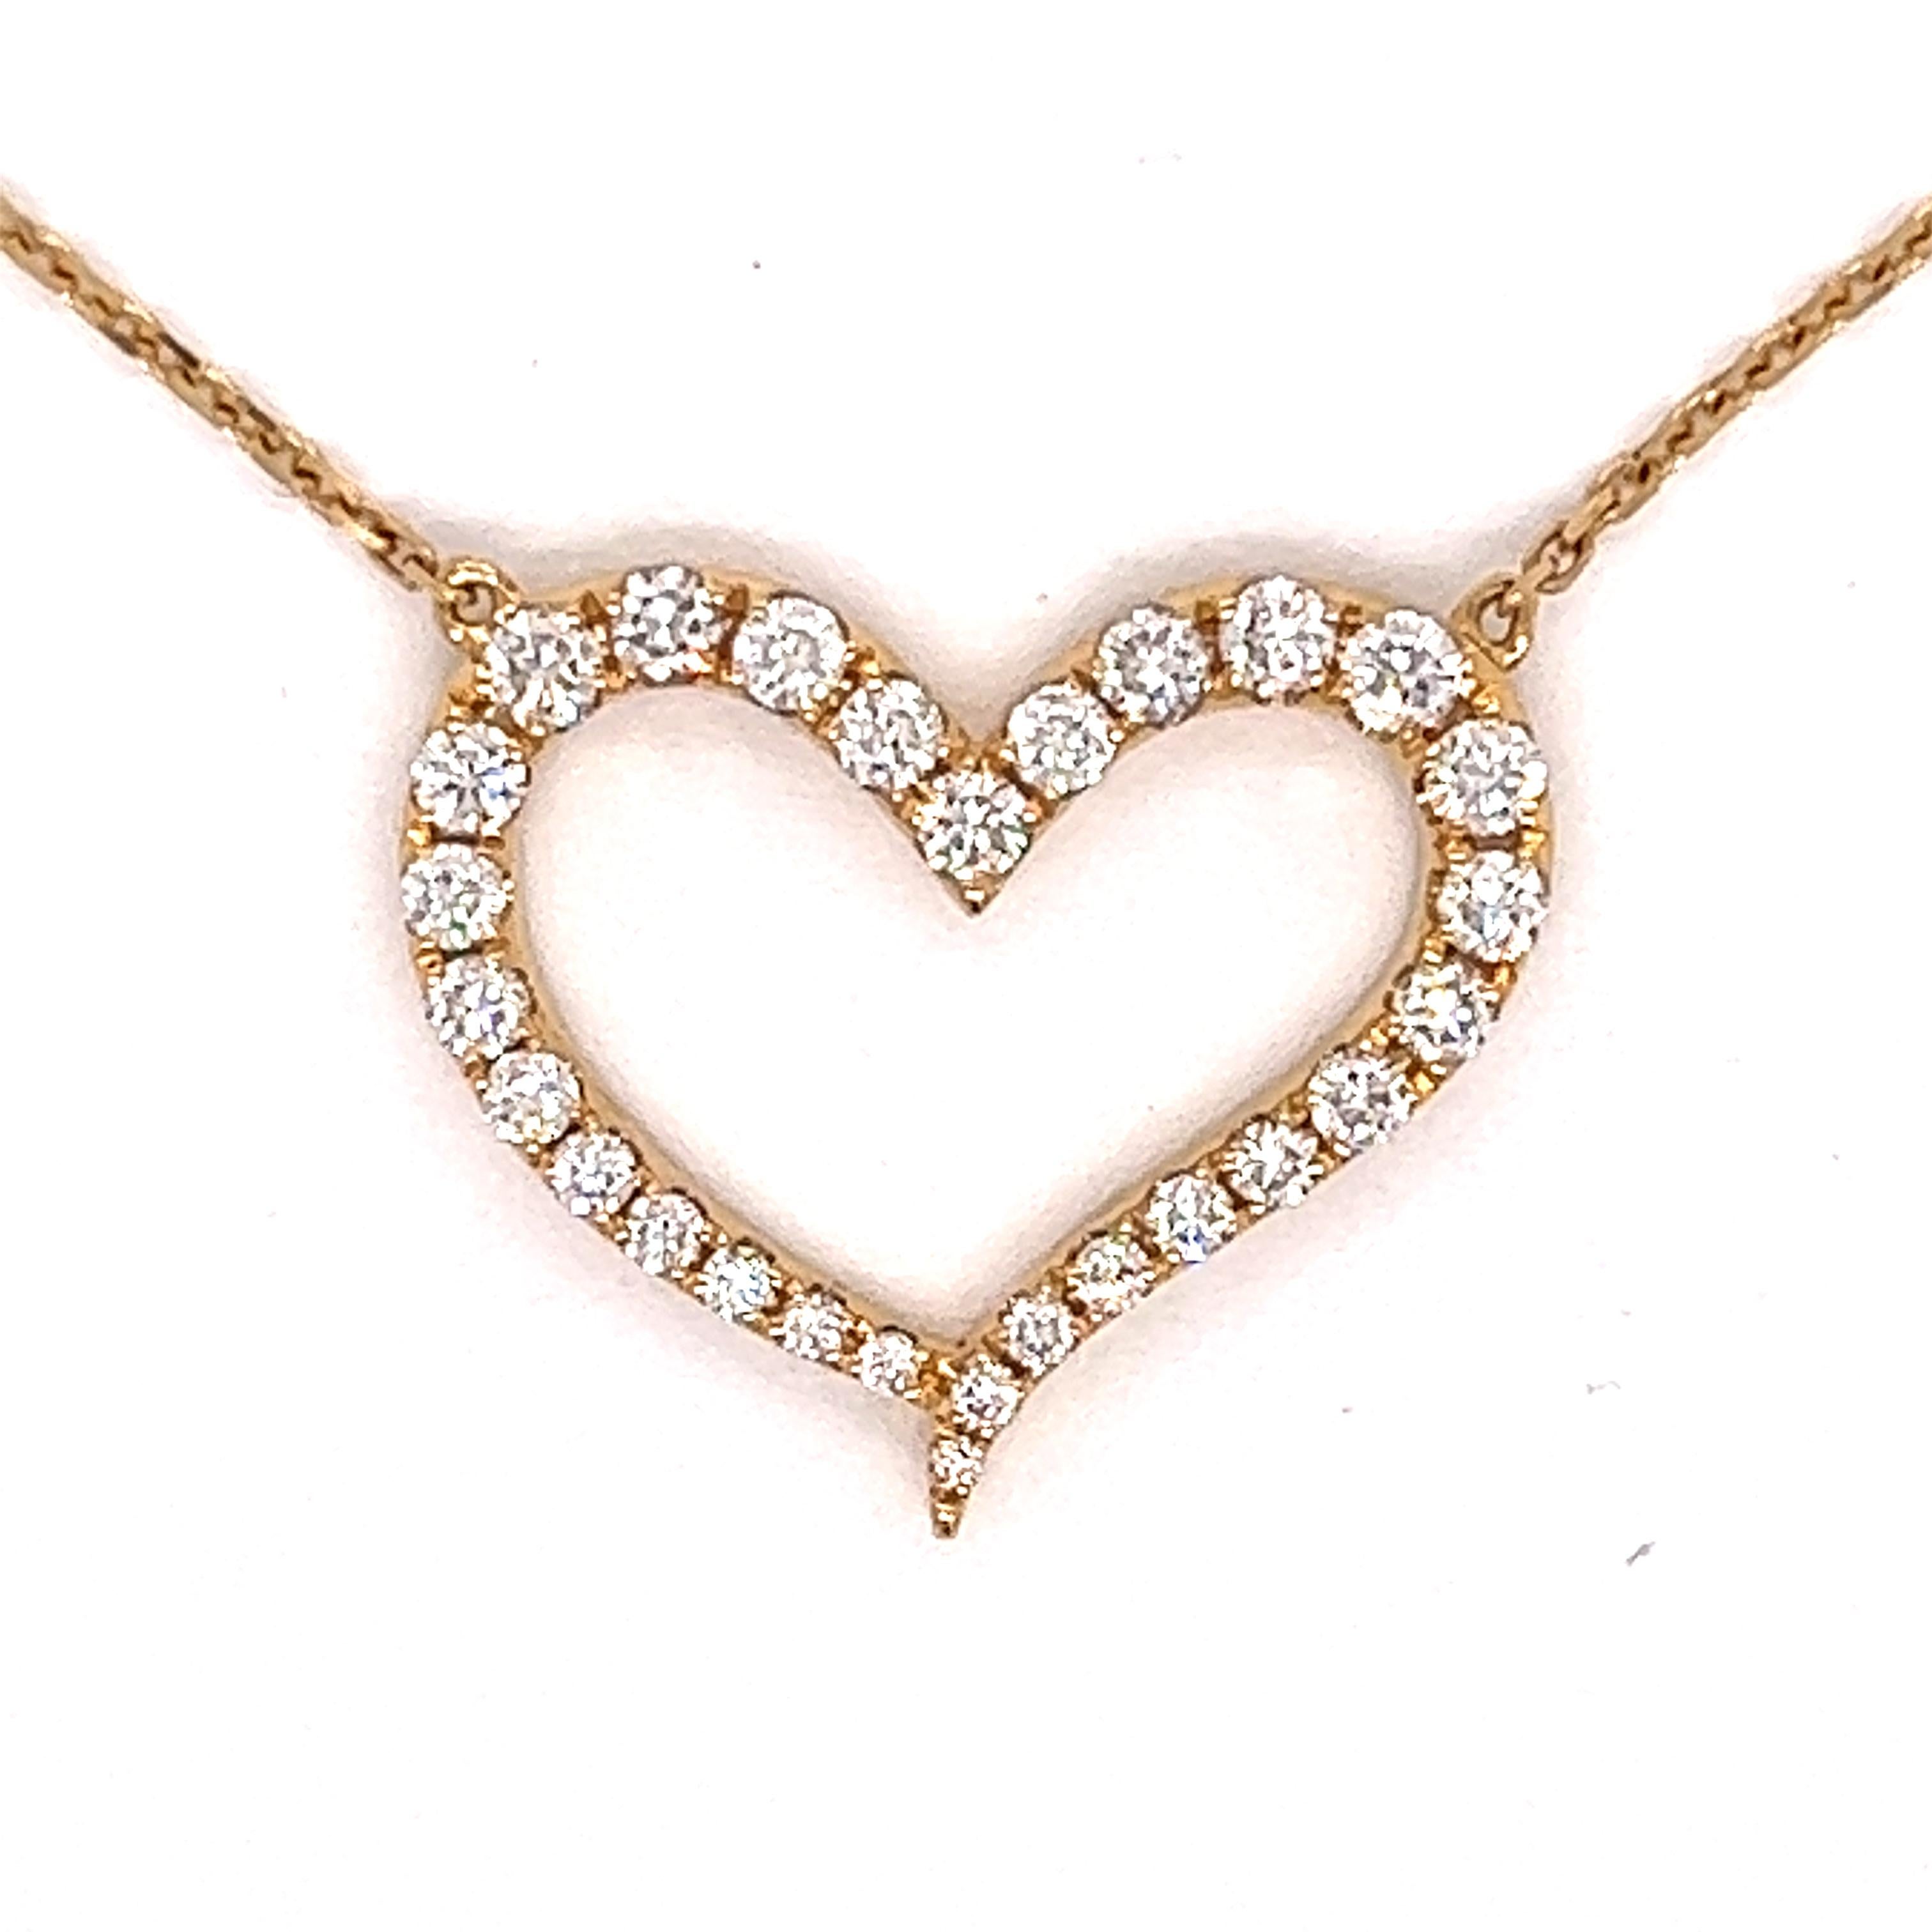 Beautiful and classic heart diamond necklace.  There are 28 diamonds with  .74 cttw.  These diamonds are of SI clarity and H-I color.  This is 4 grams of 18kt yellow gold.  The heart is stationary and does not slide.  This necklace is 18